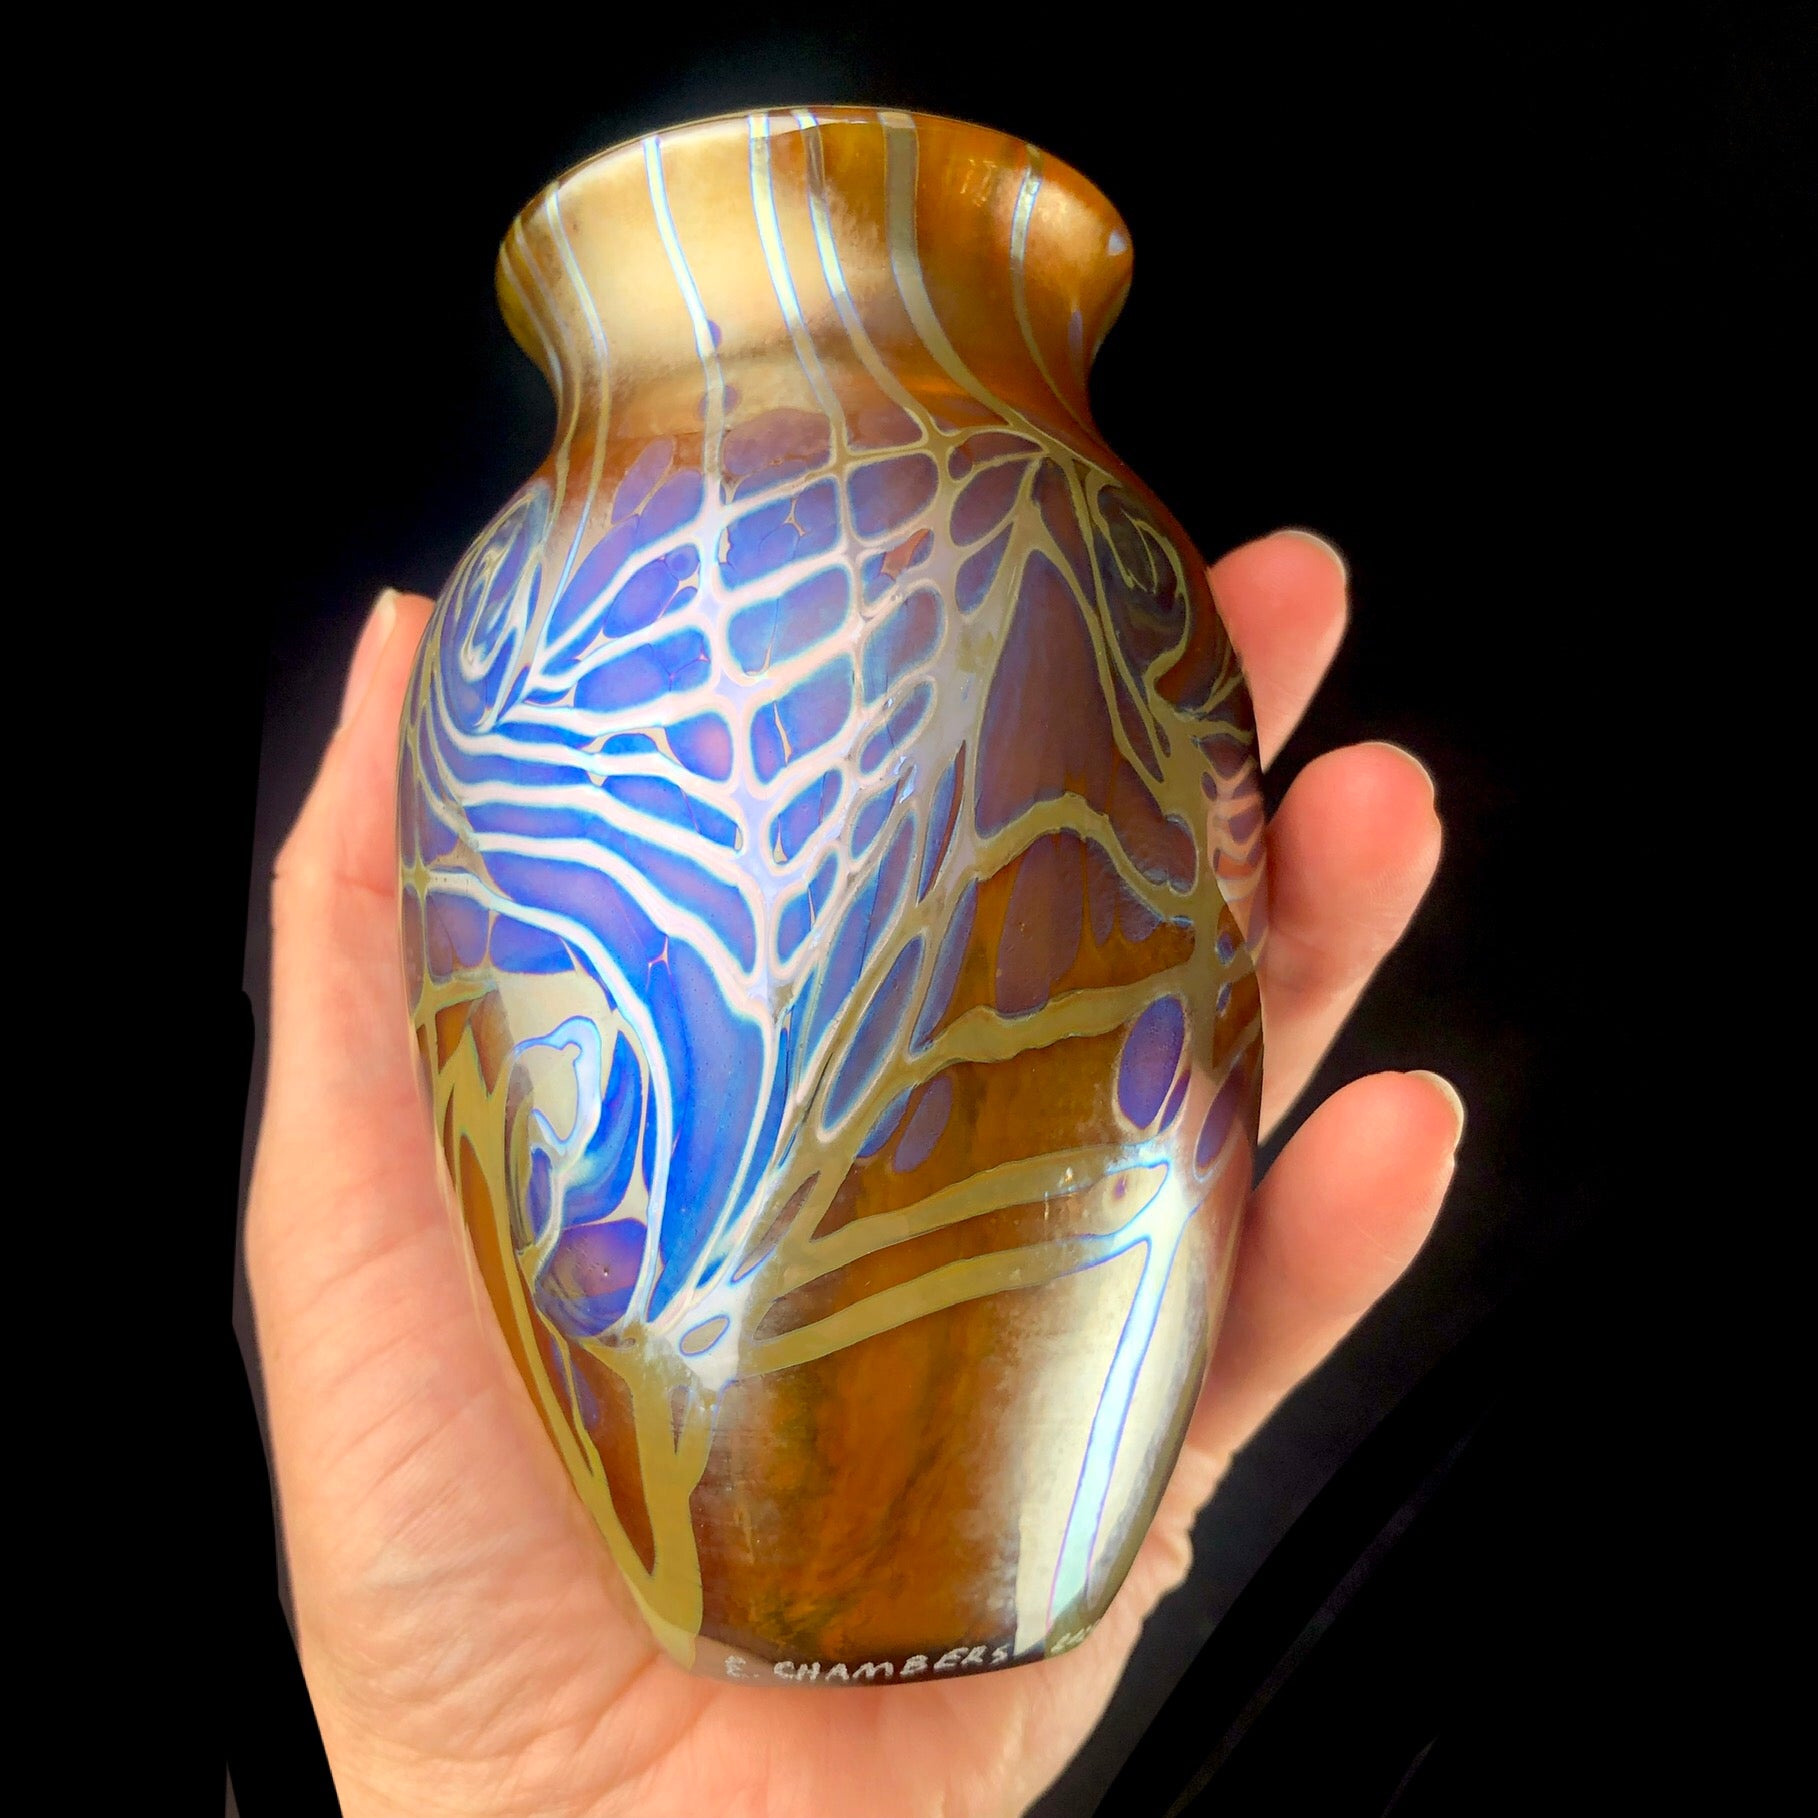 Elongated Amber Starry Night Vase shown in hand